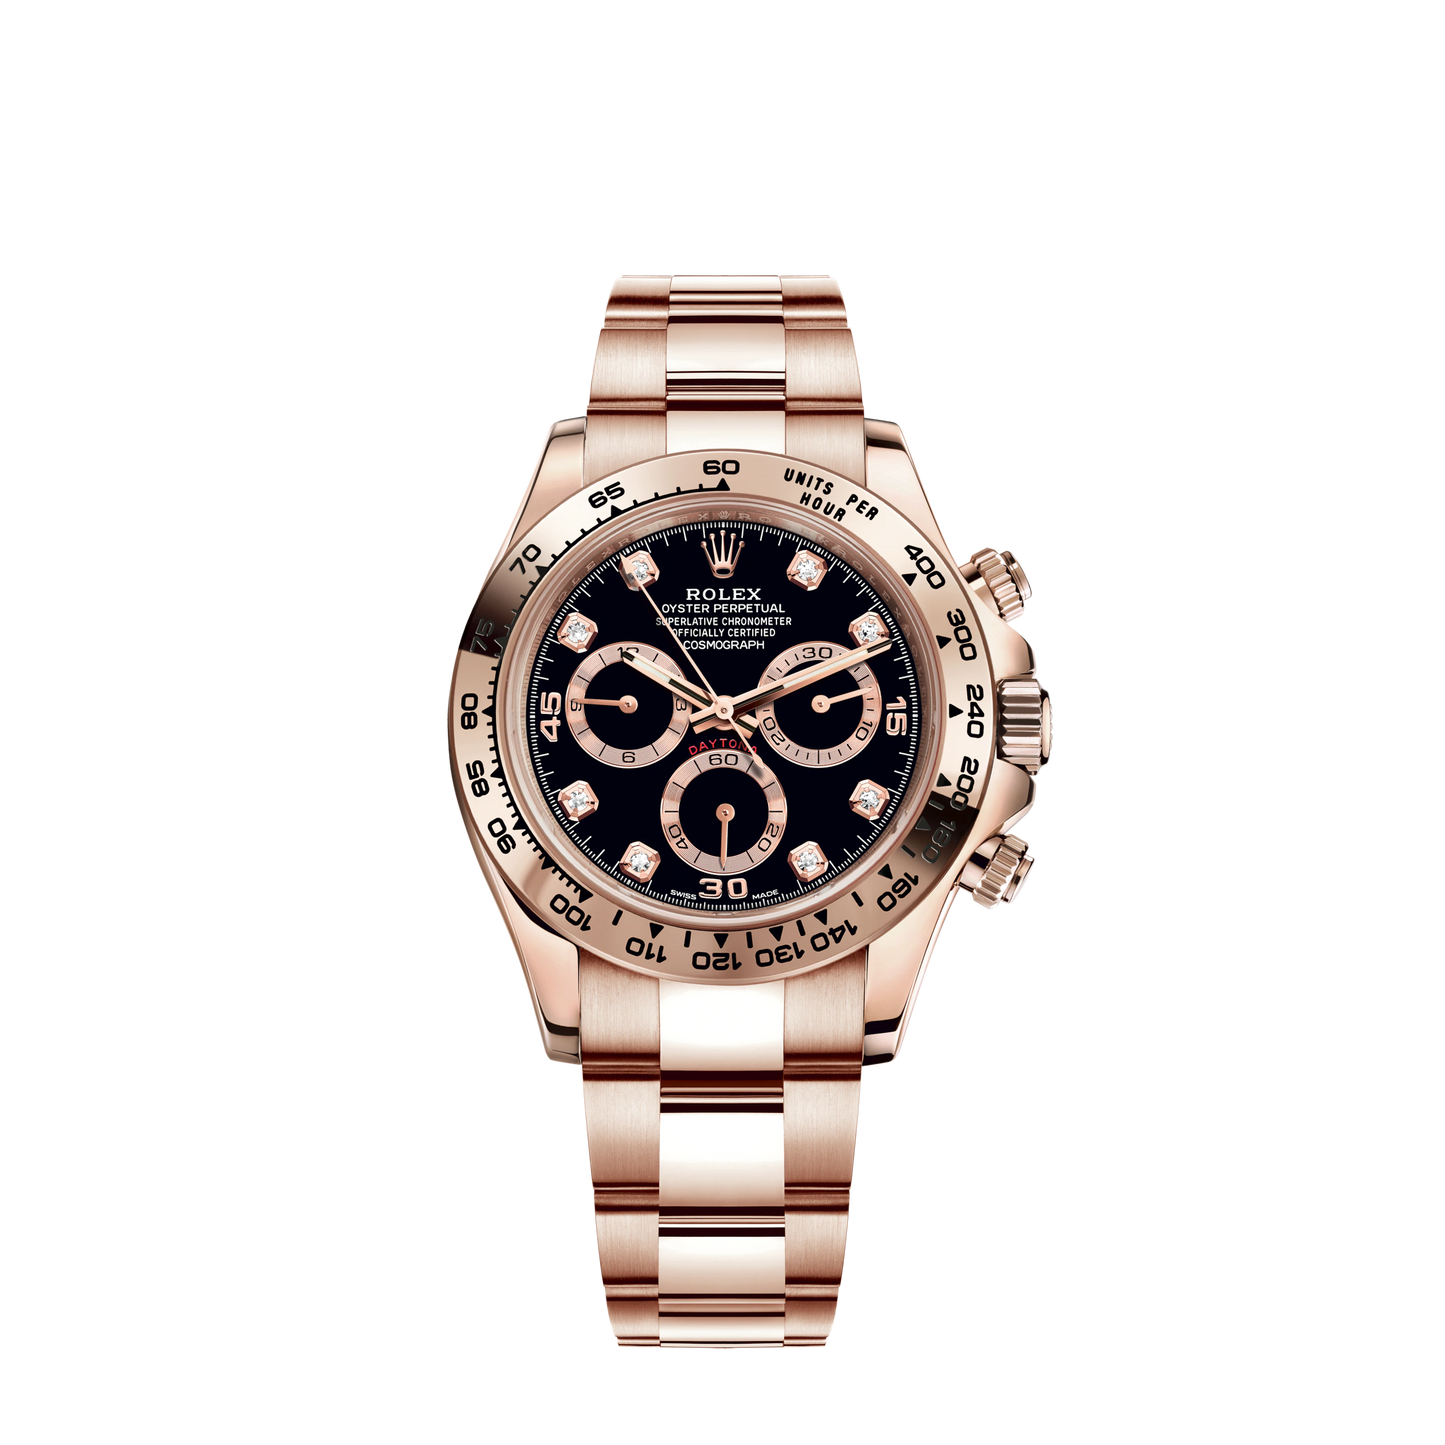 Cosmograph Daytona 40MM Oyster Bracelet With a Black Diamond-Set Dial 18 CT Everose Gold Bezel With Engraved Tachymetric Scale